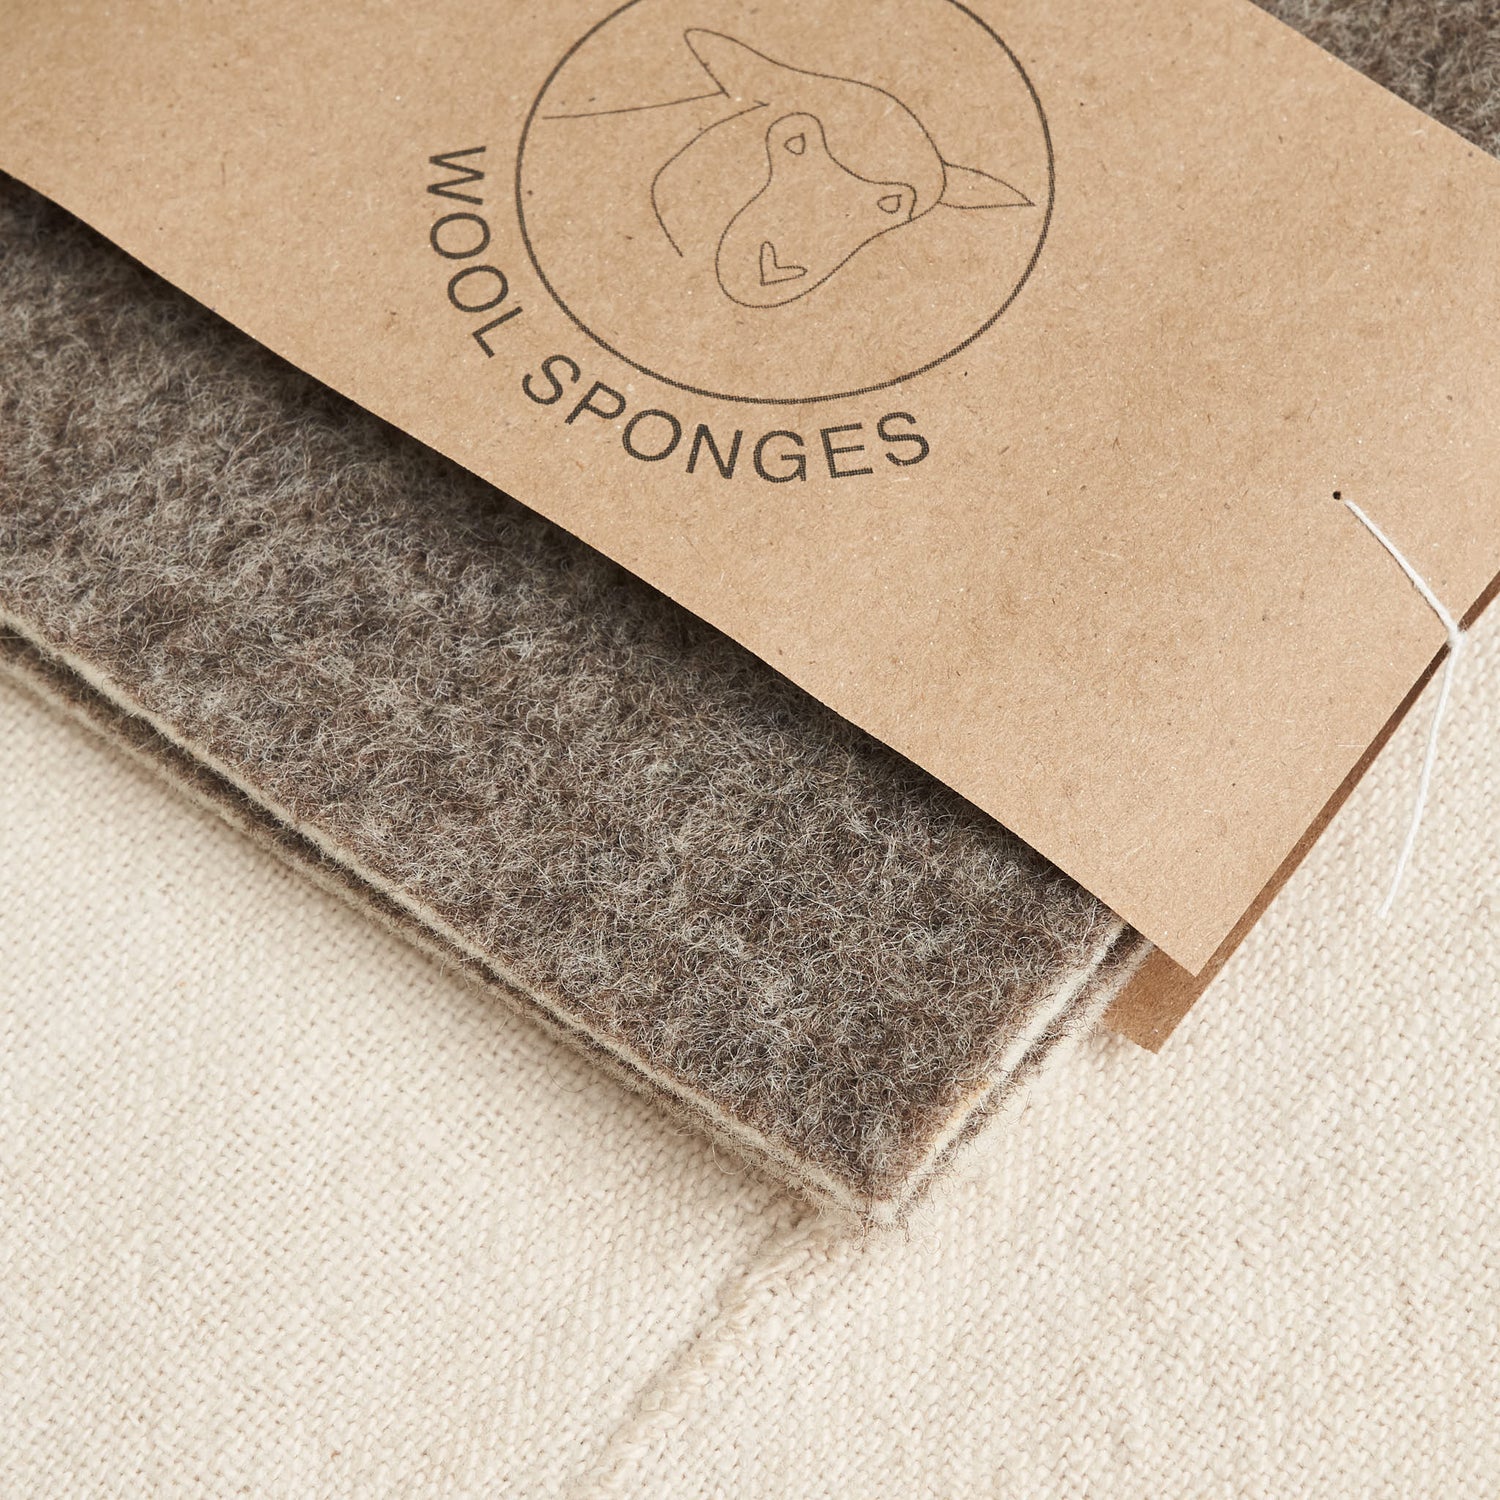 Climate Beneficial™ Wool Sponges, Two-Tone Gray/Cream